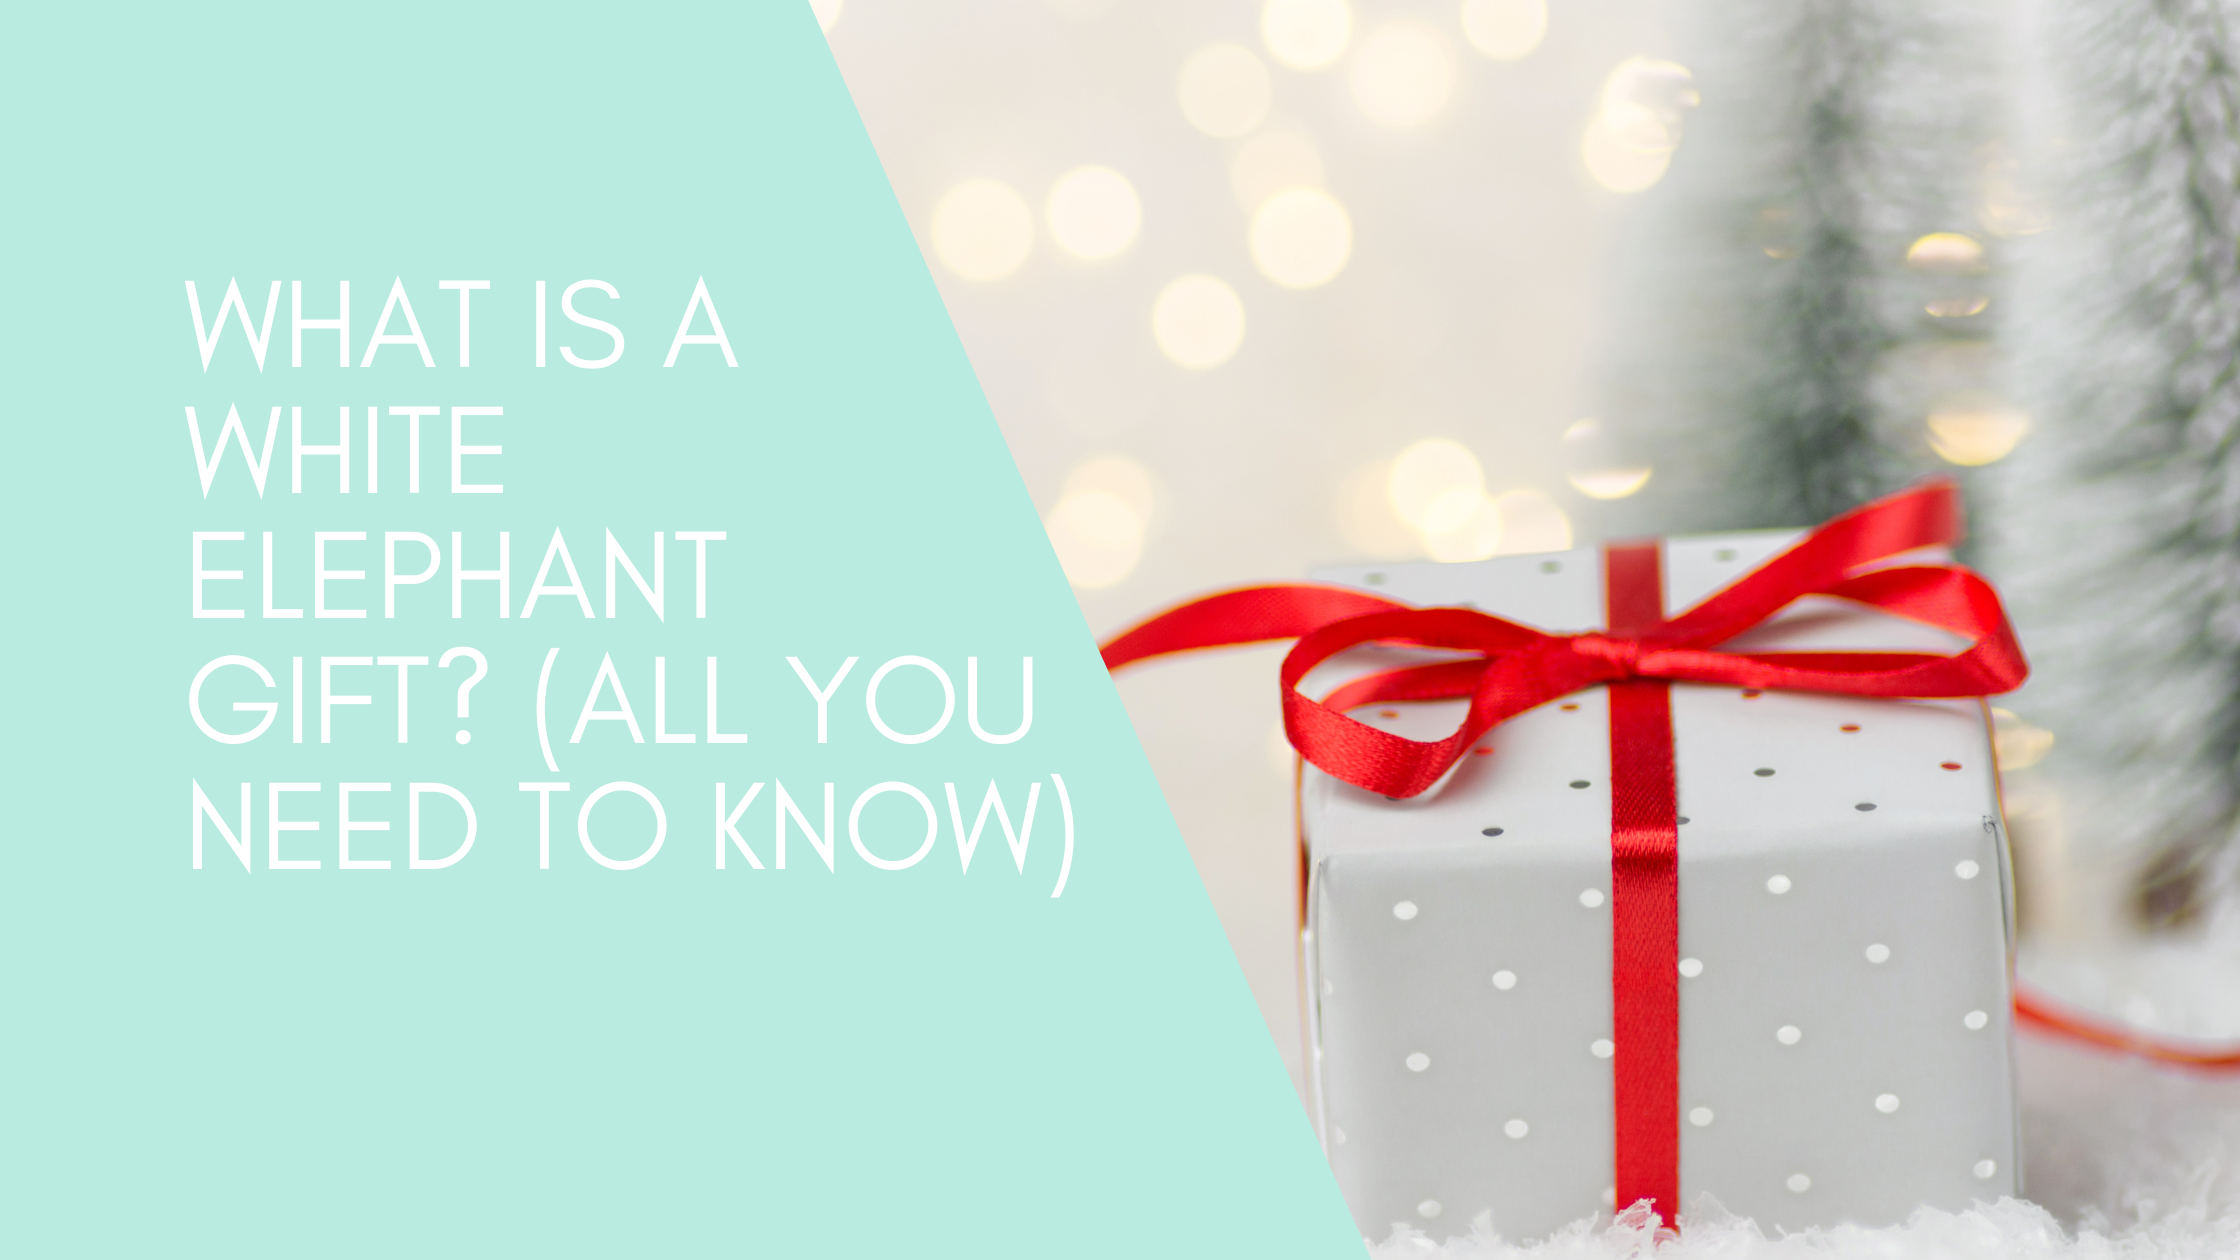 WHAT IS A WHITE ELEPHANT GIFT? (ALL YOU NEED TO KNOW)